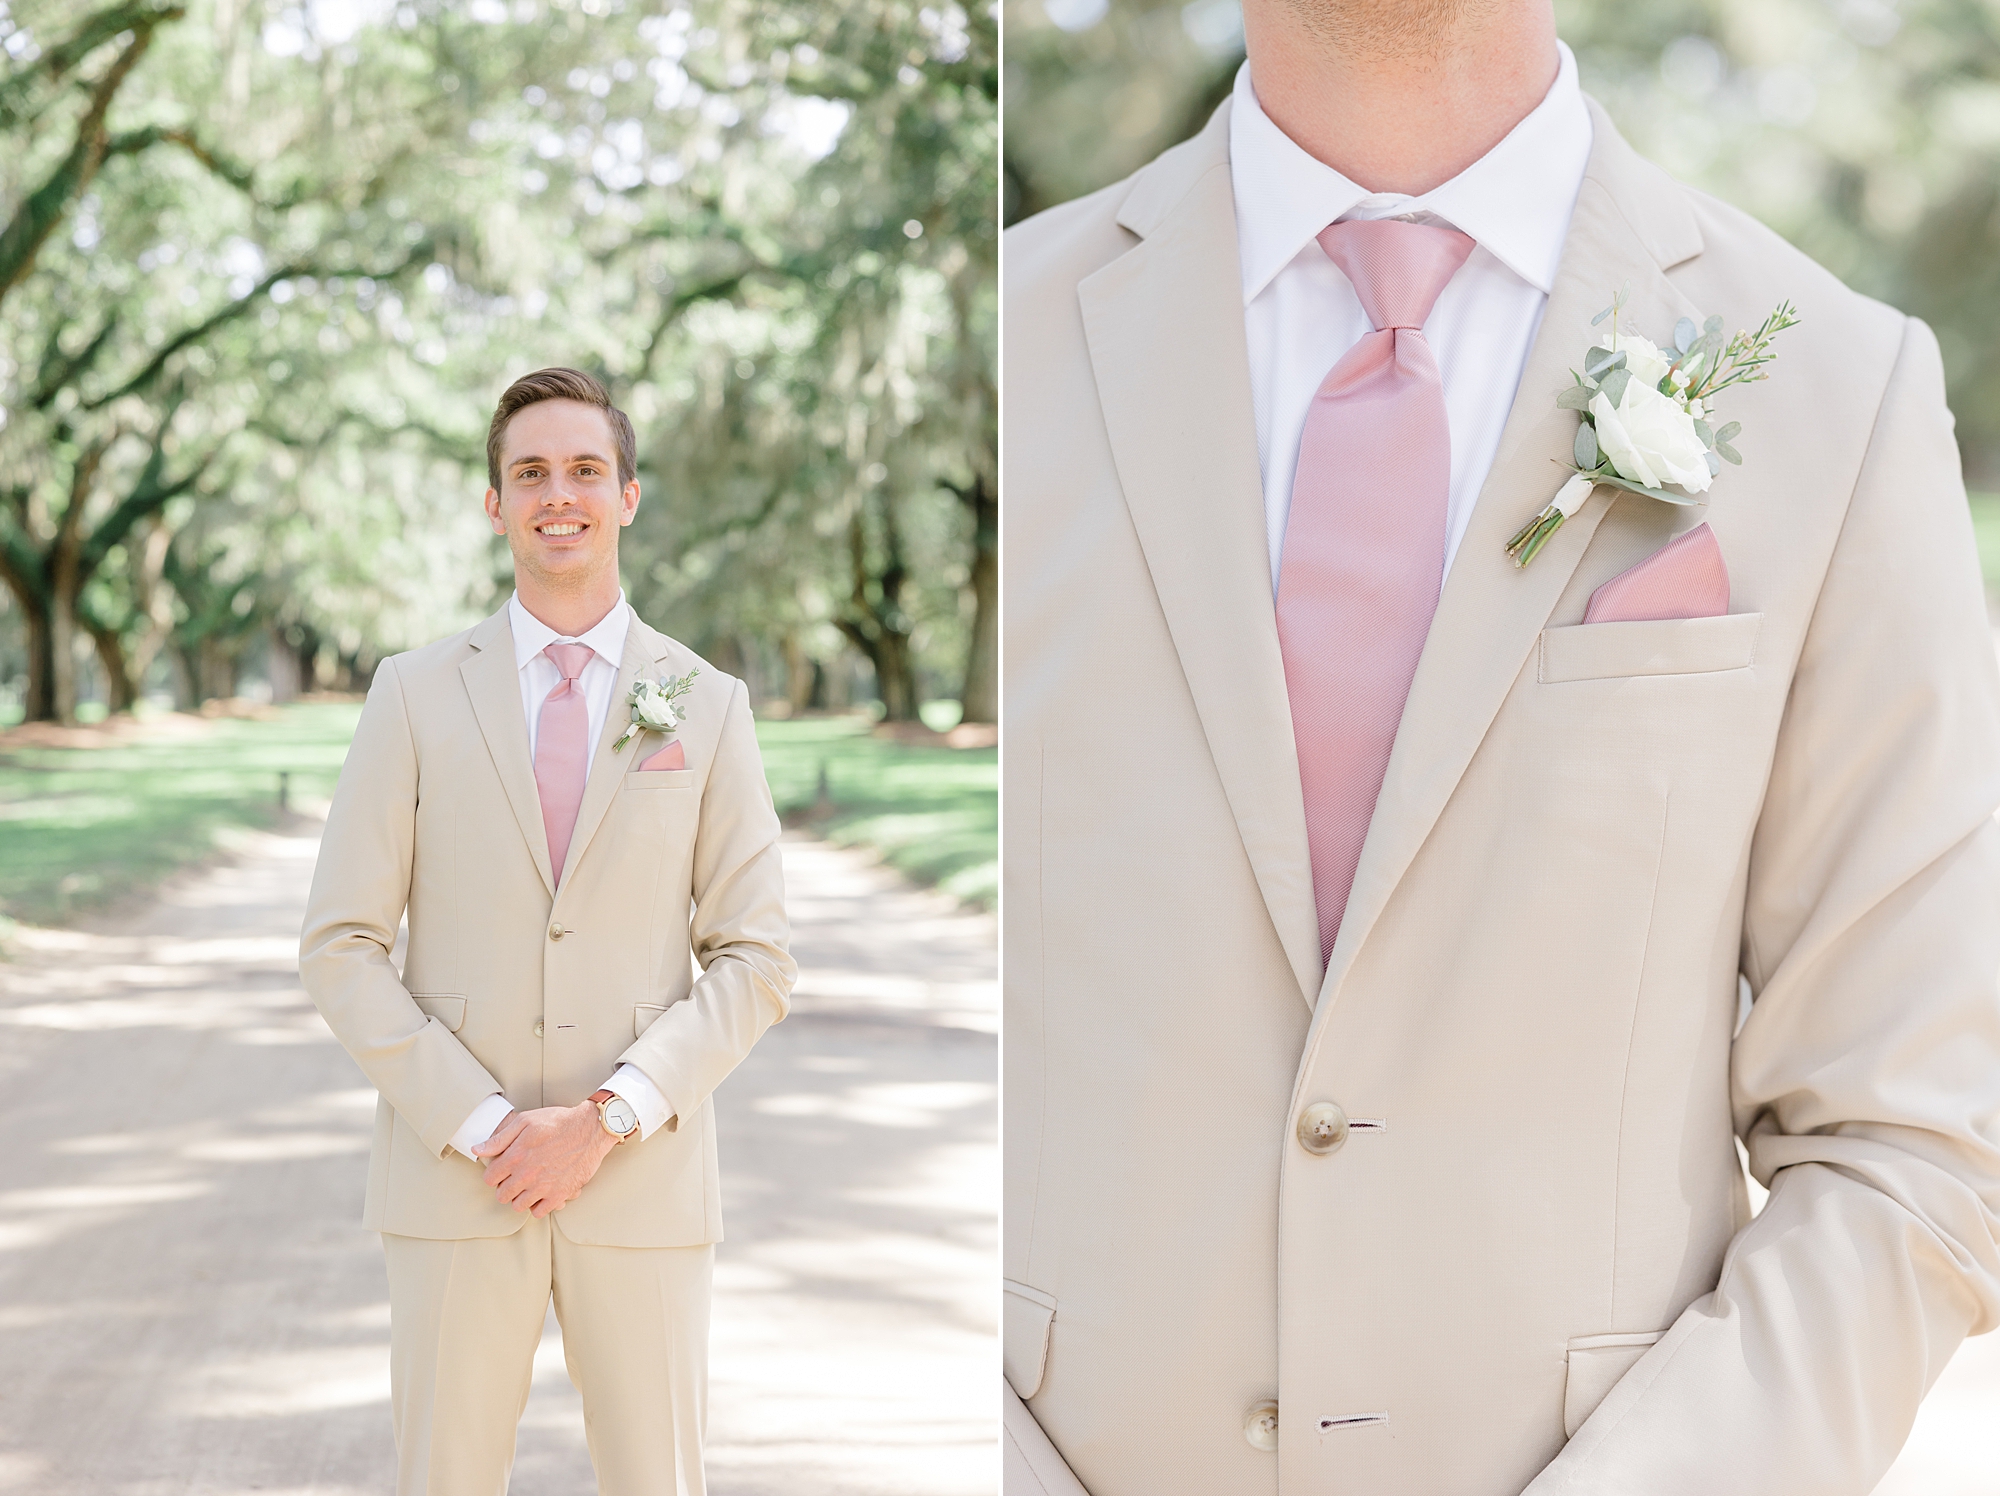 groom stands in tan suit with pink tie